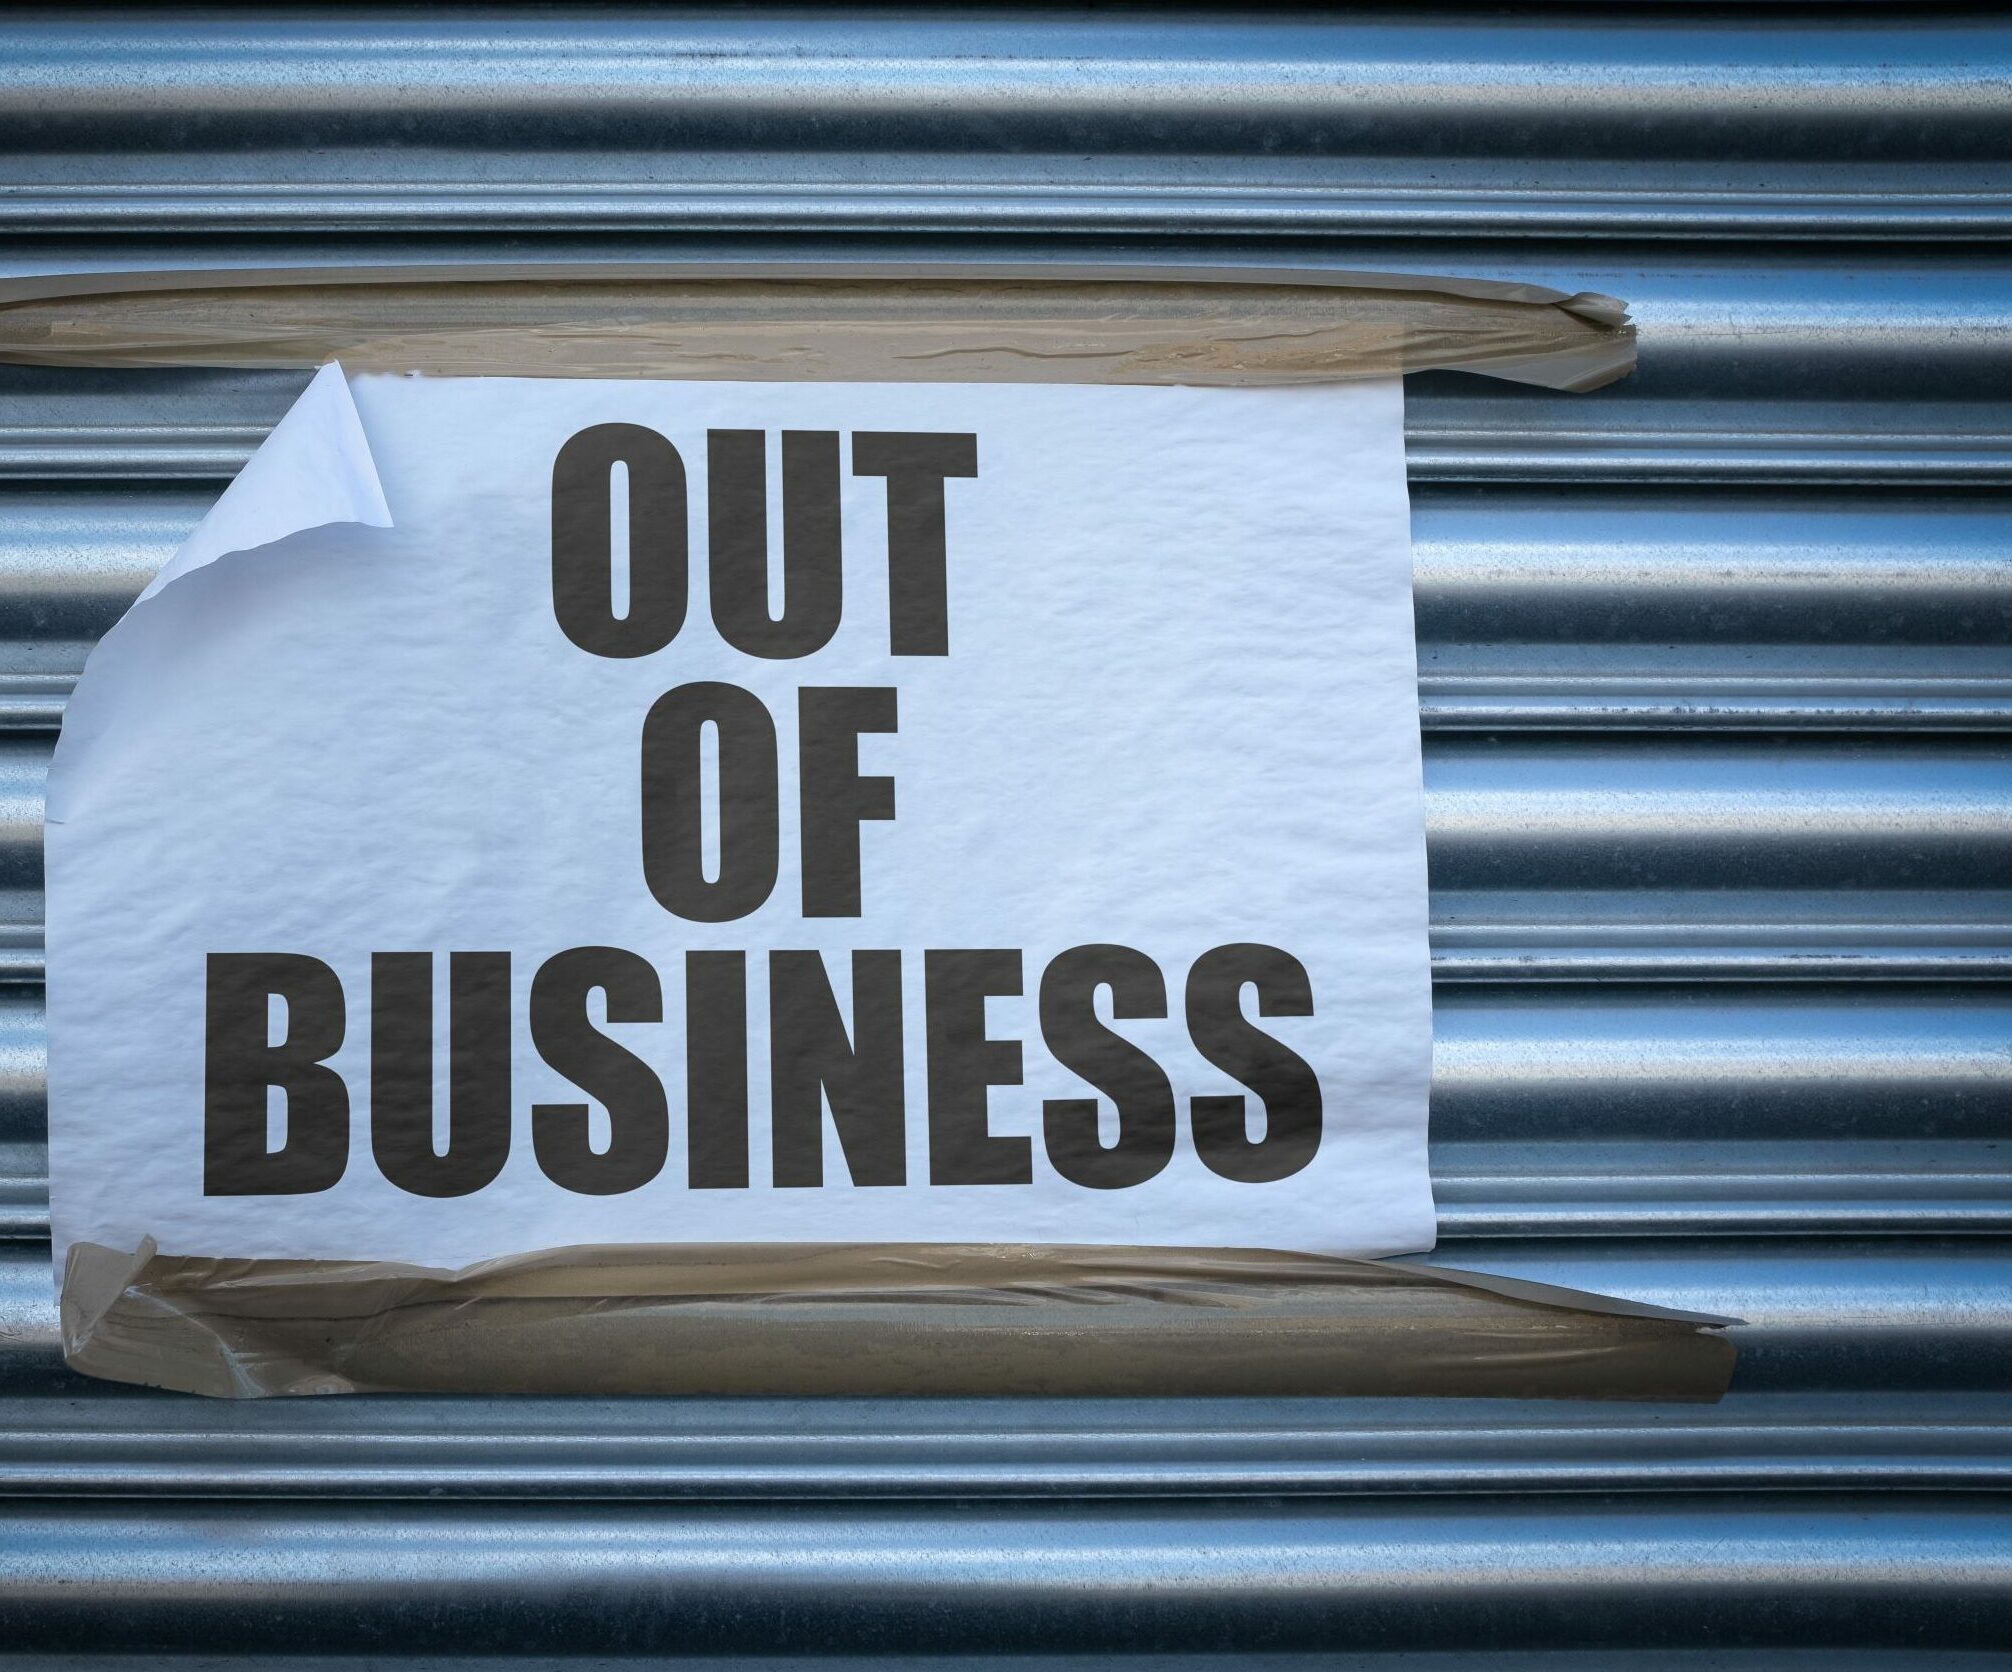 Some common reasons why small businesses fail